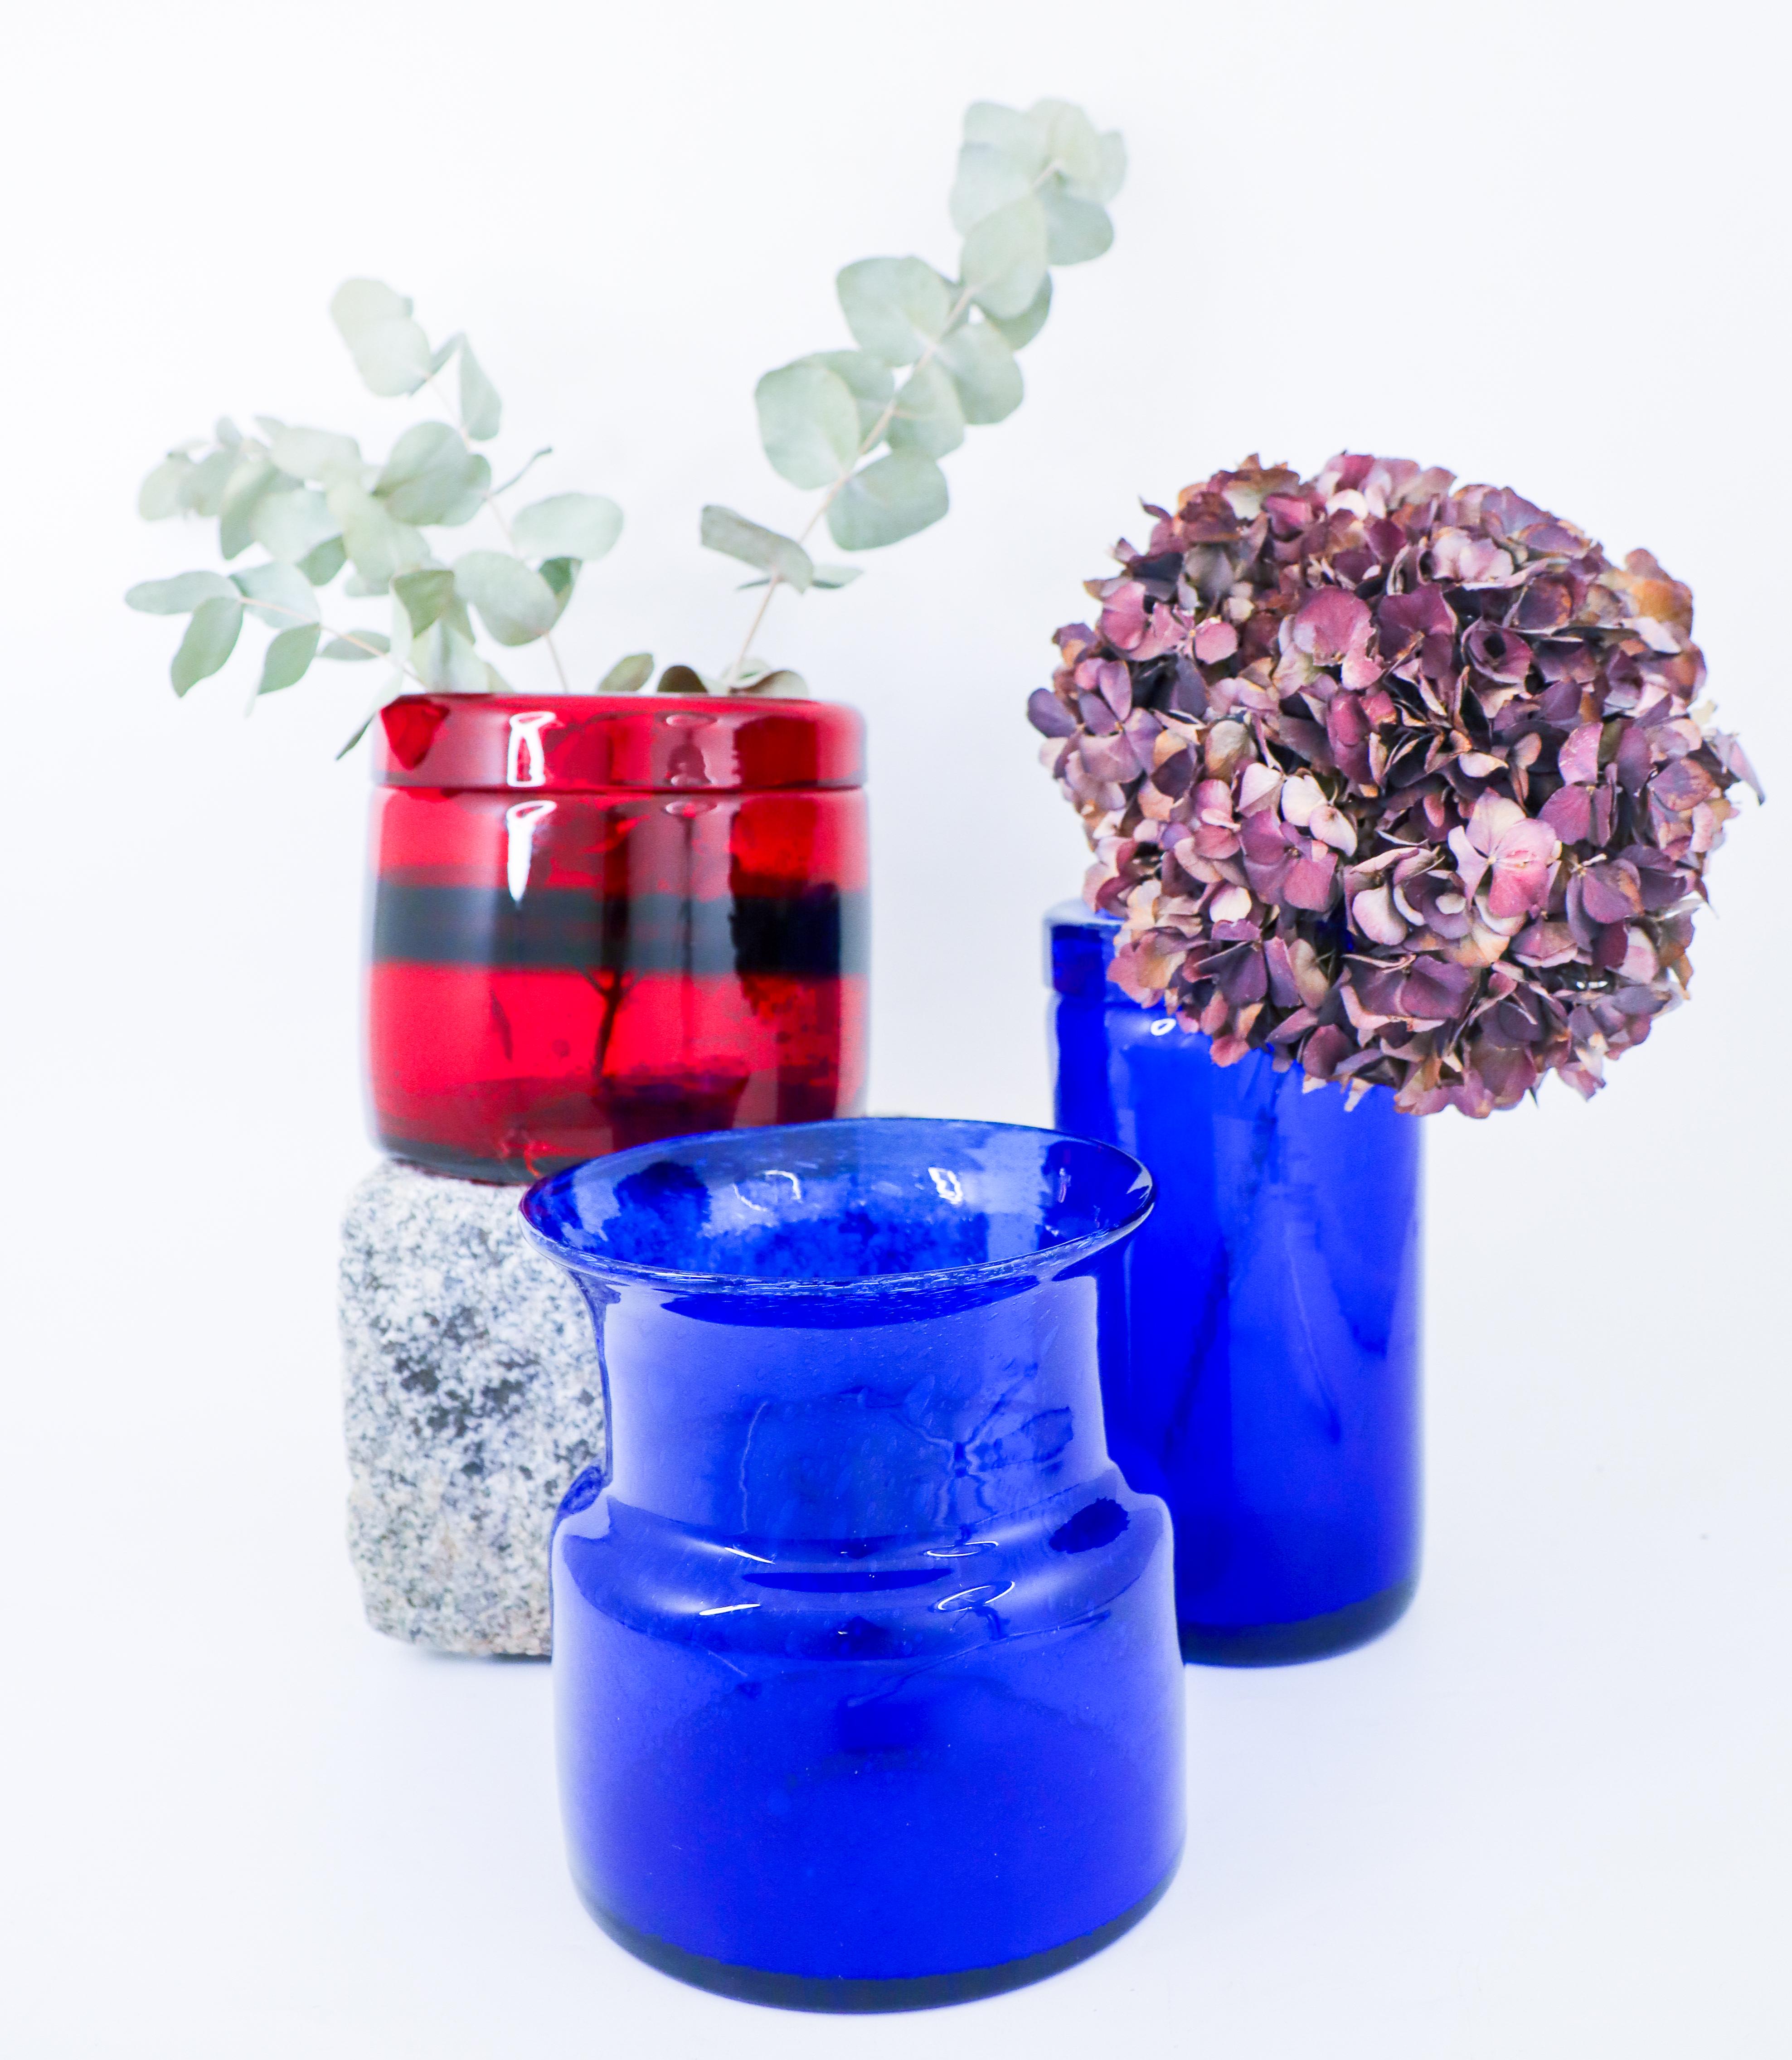 Three glassvases designed by Erik Höglund at Boda, Sweden. The red vase is 13.5 cm high and 15 cm in diameter, the highest blue vase is 21.5 cm high and 11 cm in diameter, the other blue vase is 16,5 cm high and 15 cm in diameter. The red vase do